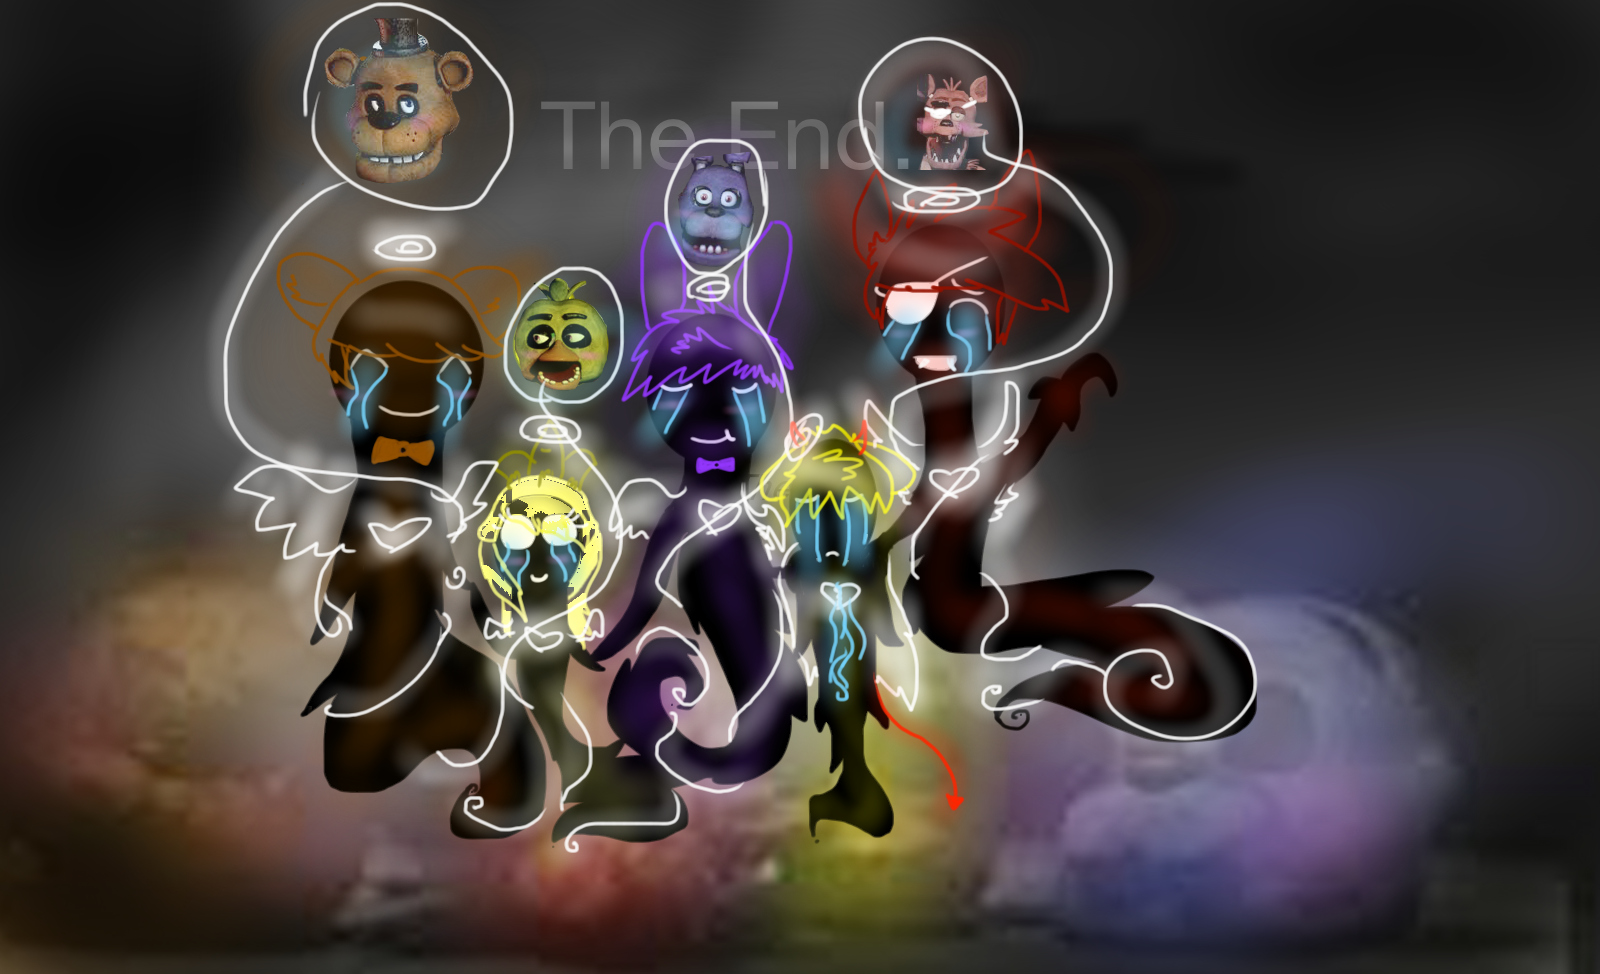 Fnaf favourites by CloudyPaw20 on DeviantArt